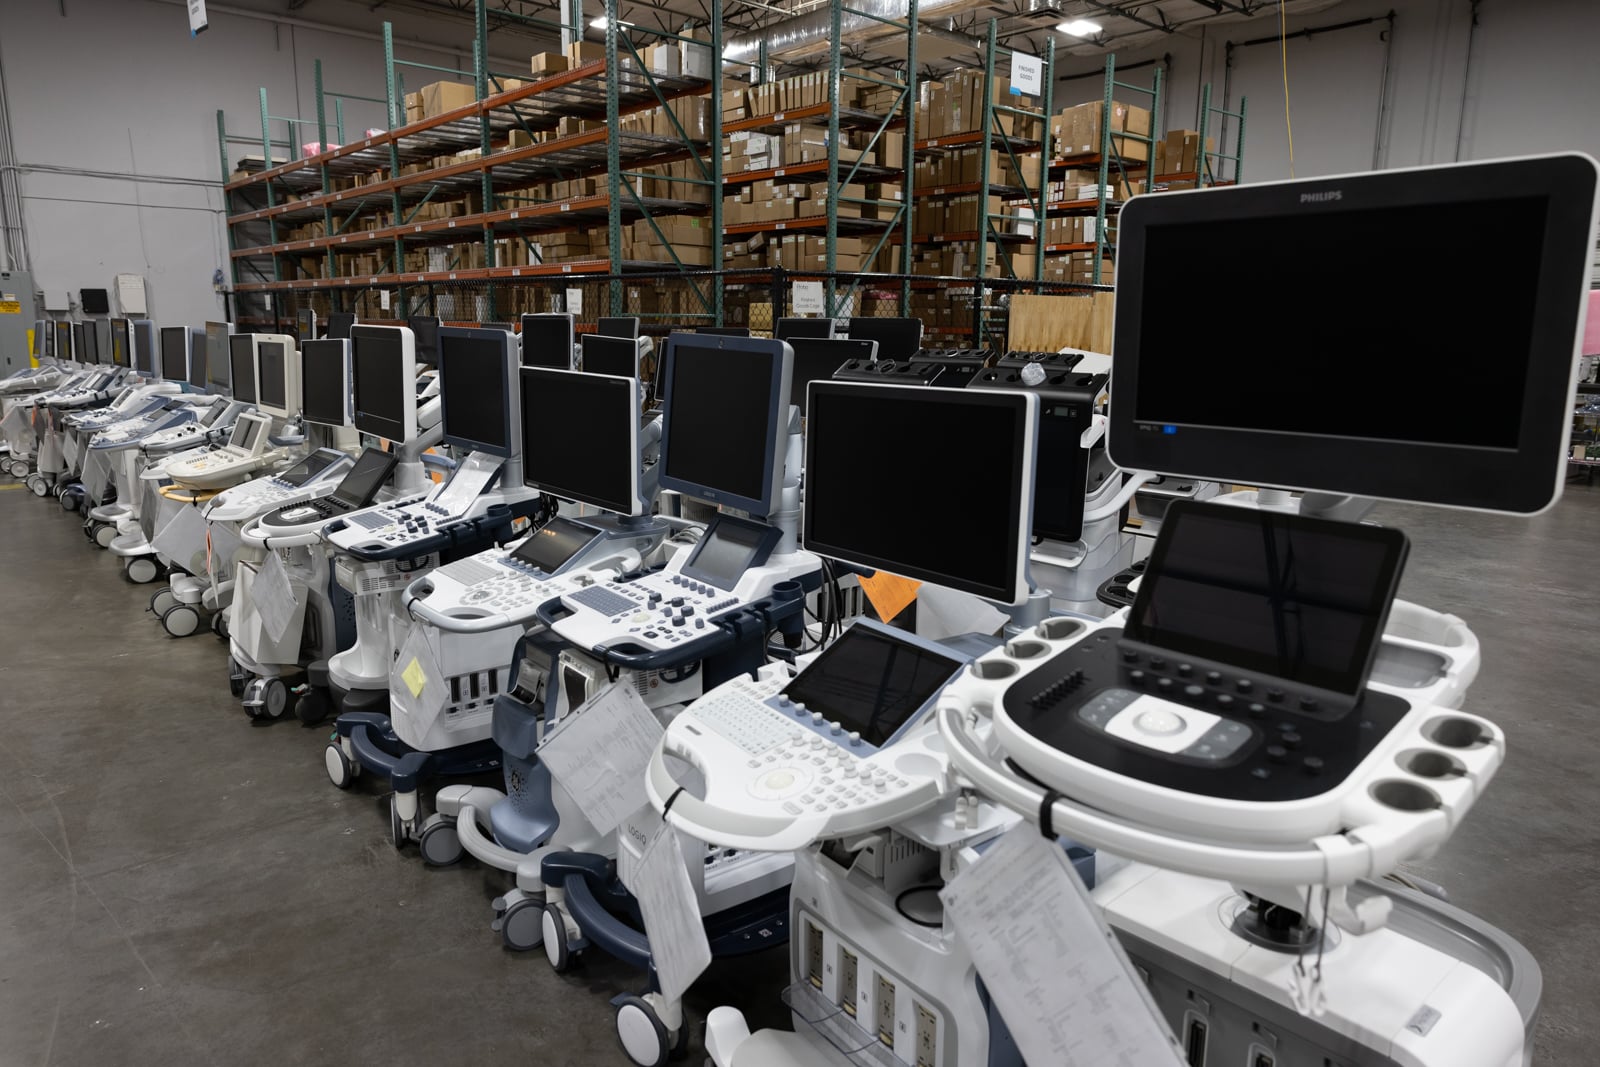 Lineup of of refurbished ultrasounds for sale or rent